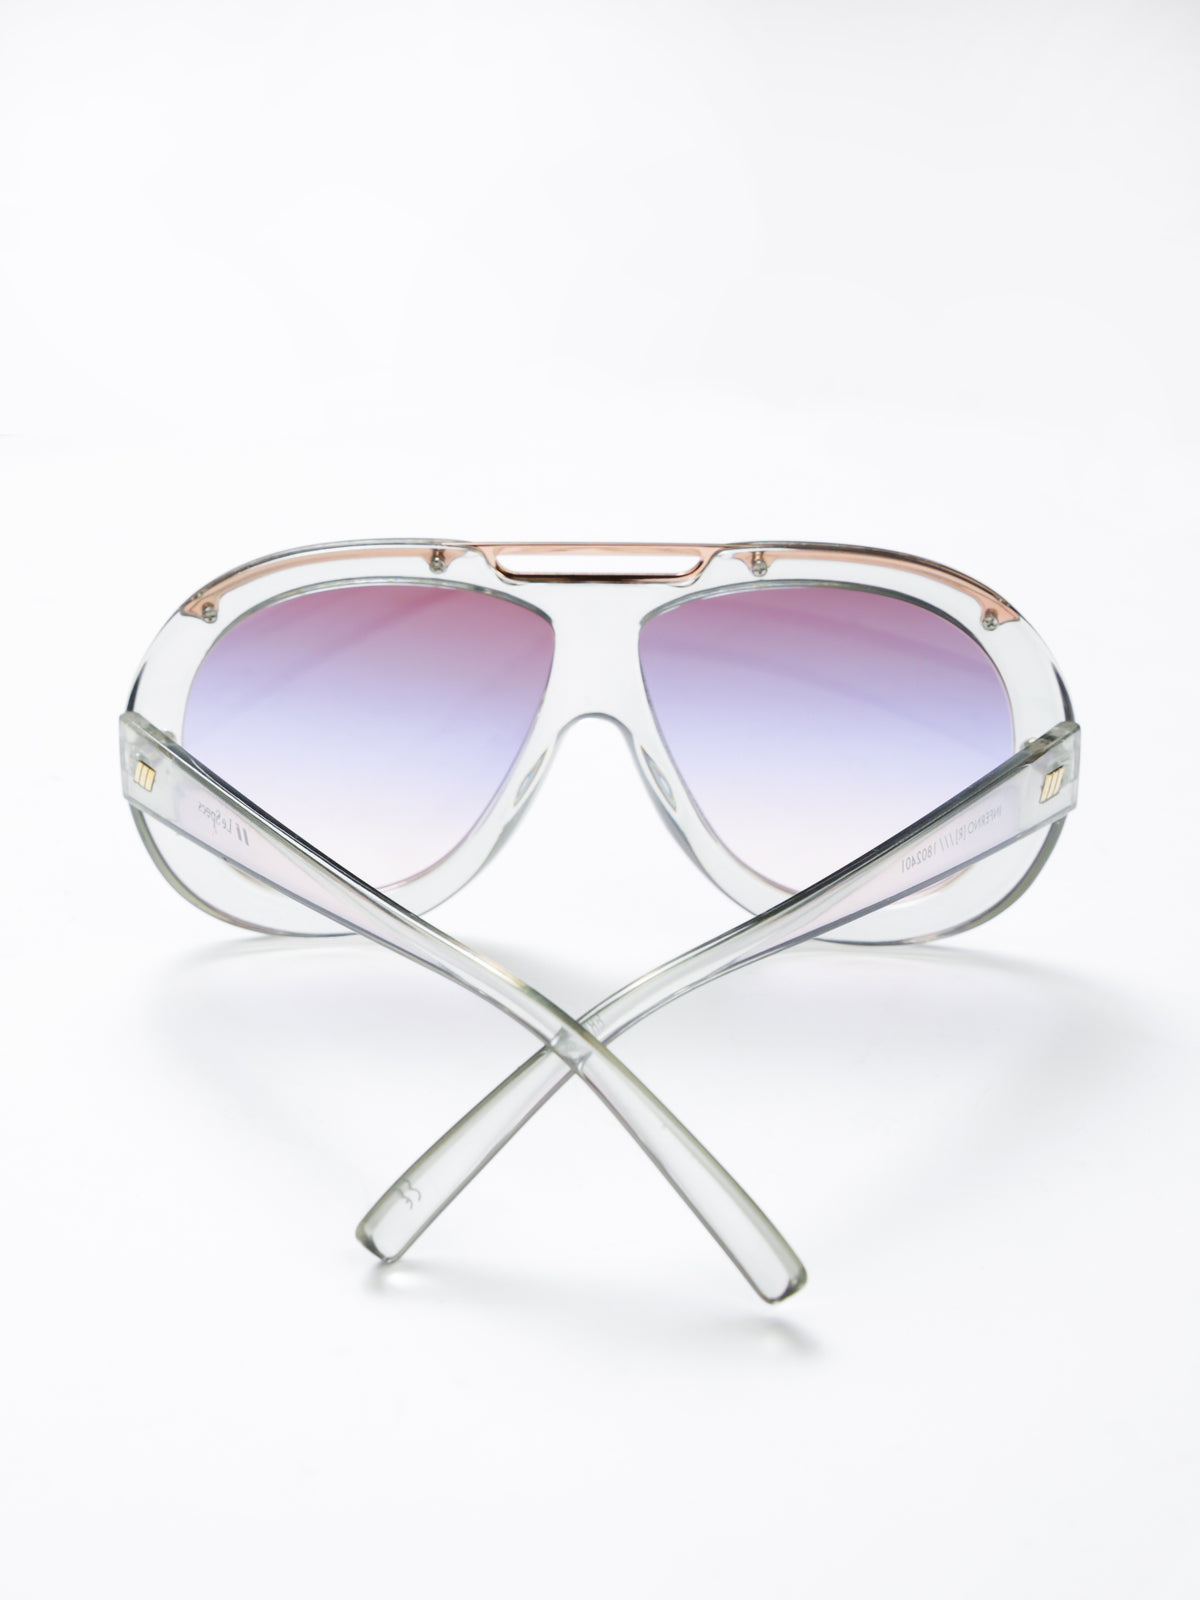 Inferno Sunglasses in Shadow Black with Purple Lens